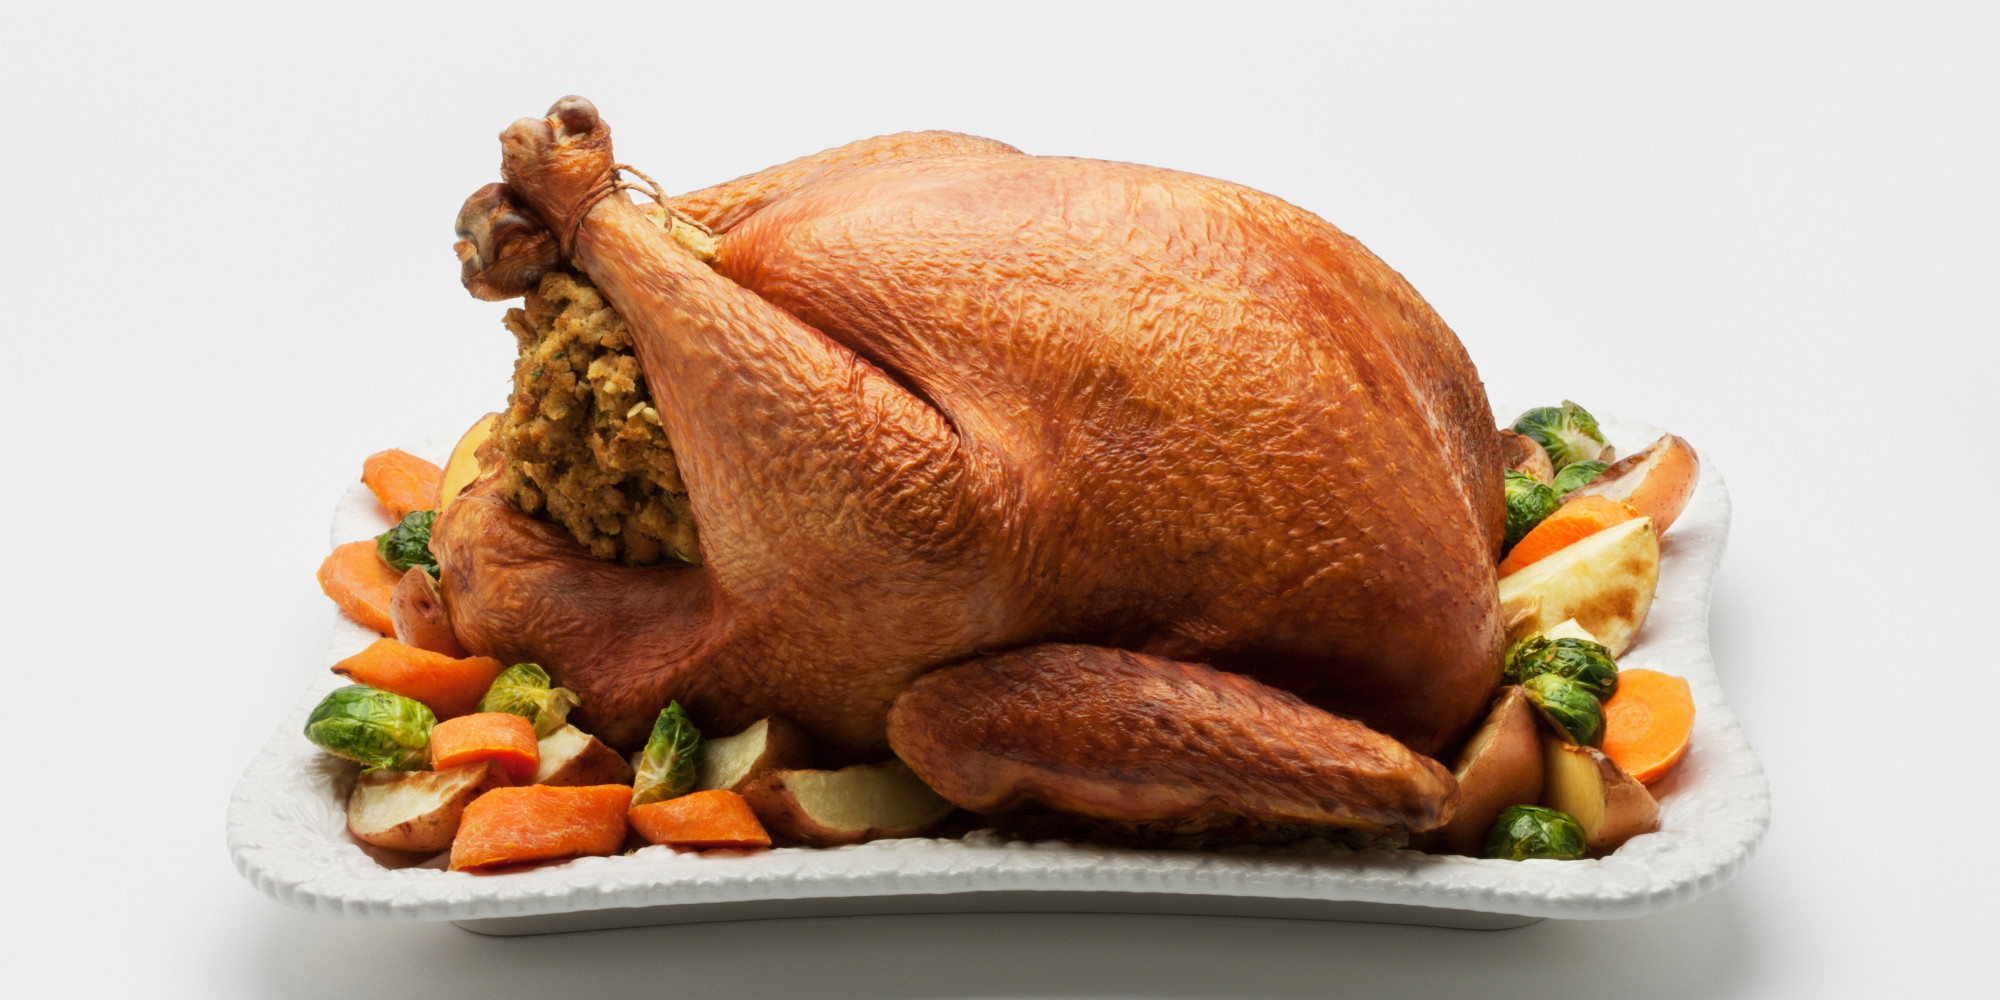 Images Of Thanksgiving Turkey
 Tryptophan Making You Sleepy Is A Big Fat Lie